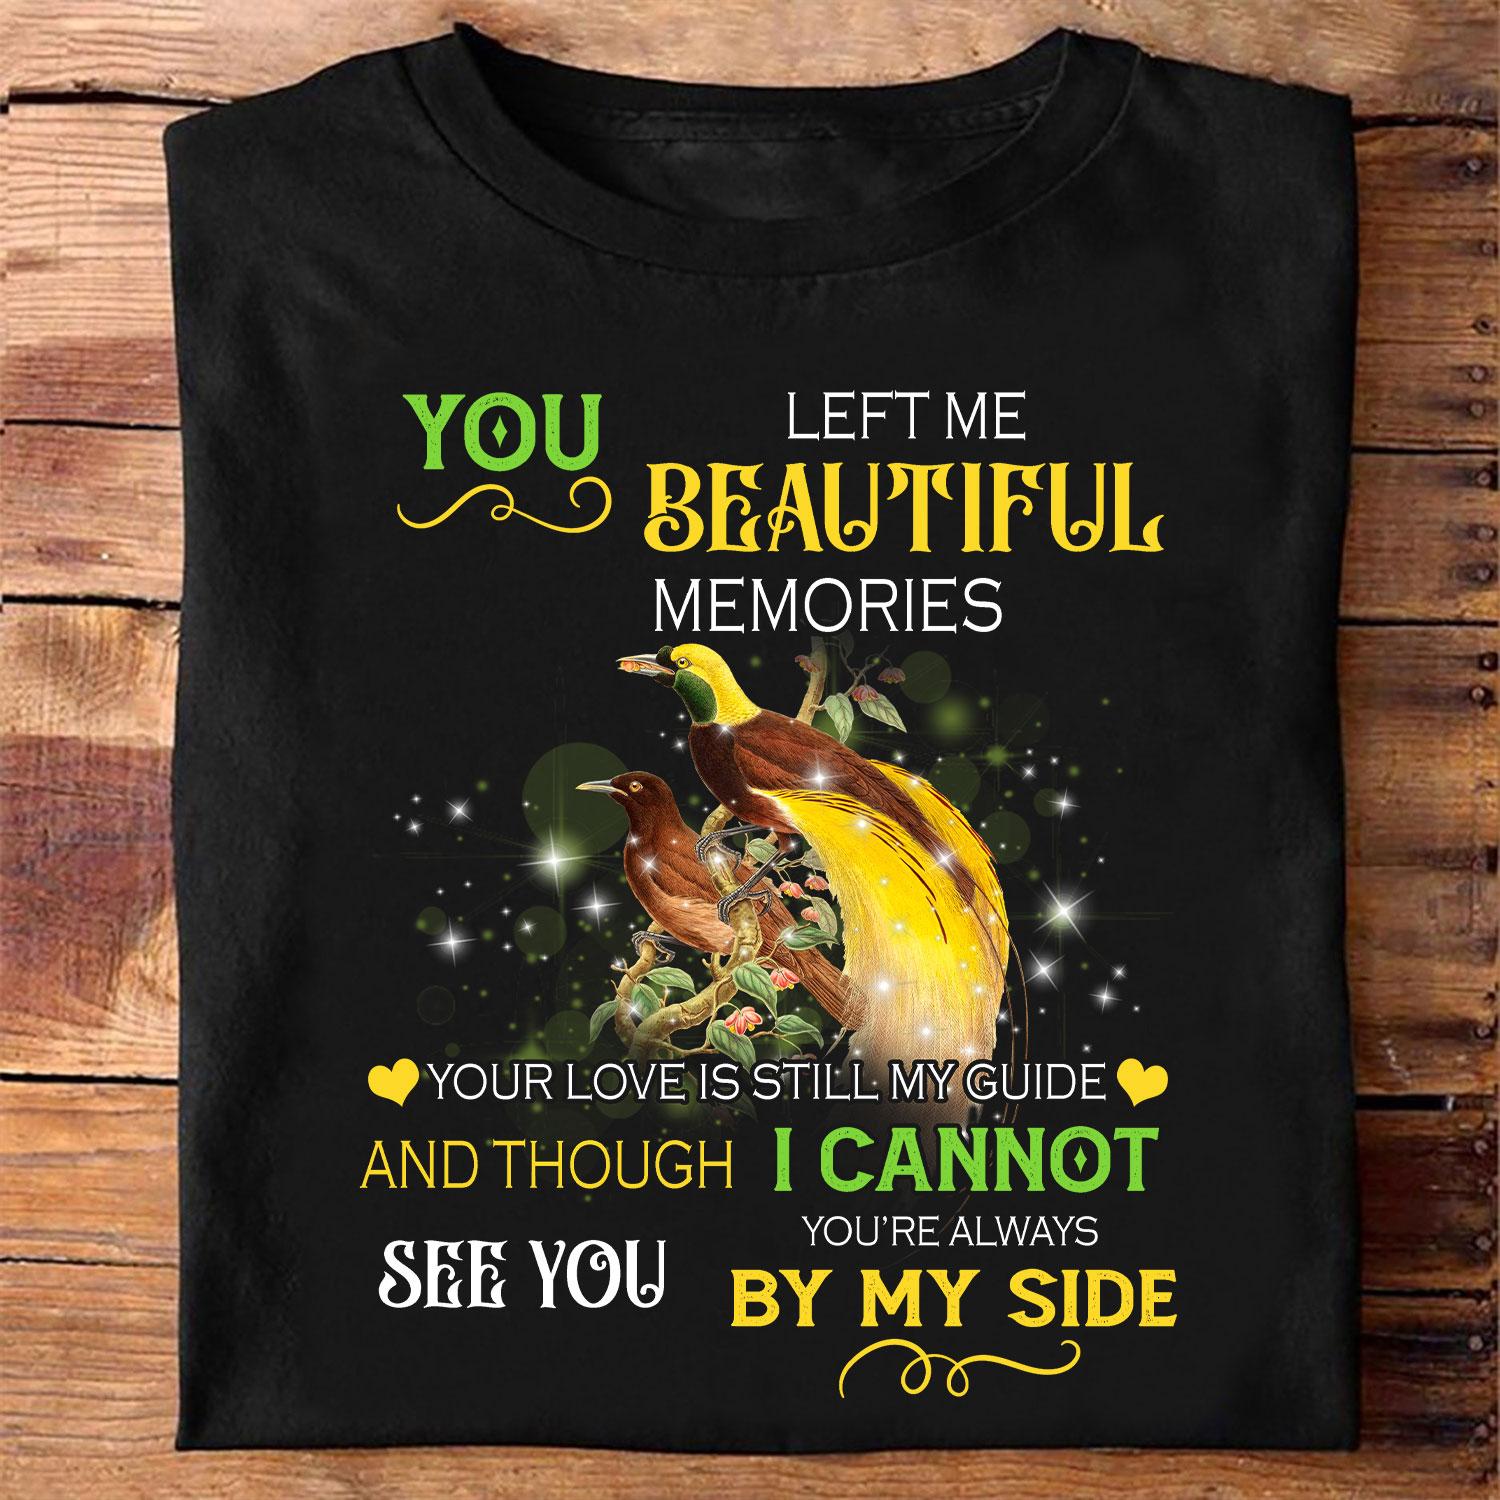 Bird Graphic T-shirt - You left me beautiful memories your love is still my guice and though i cannot see you